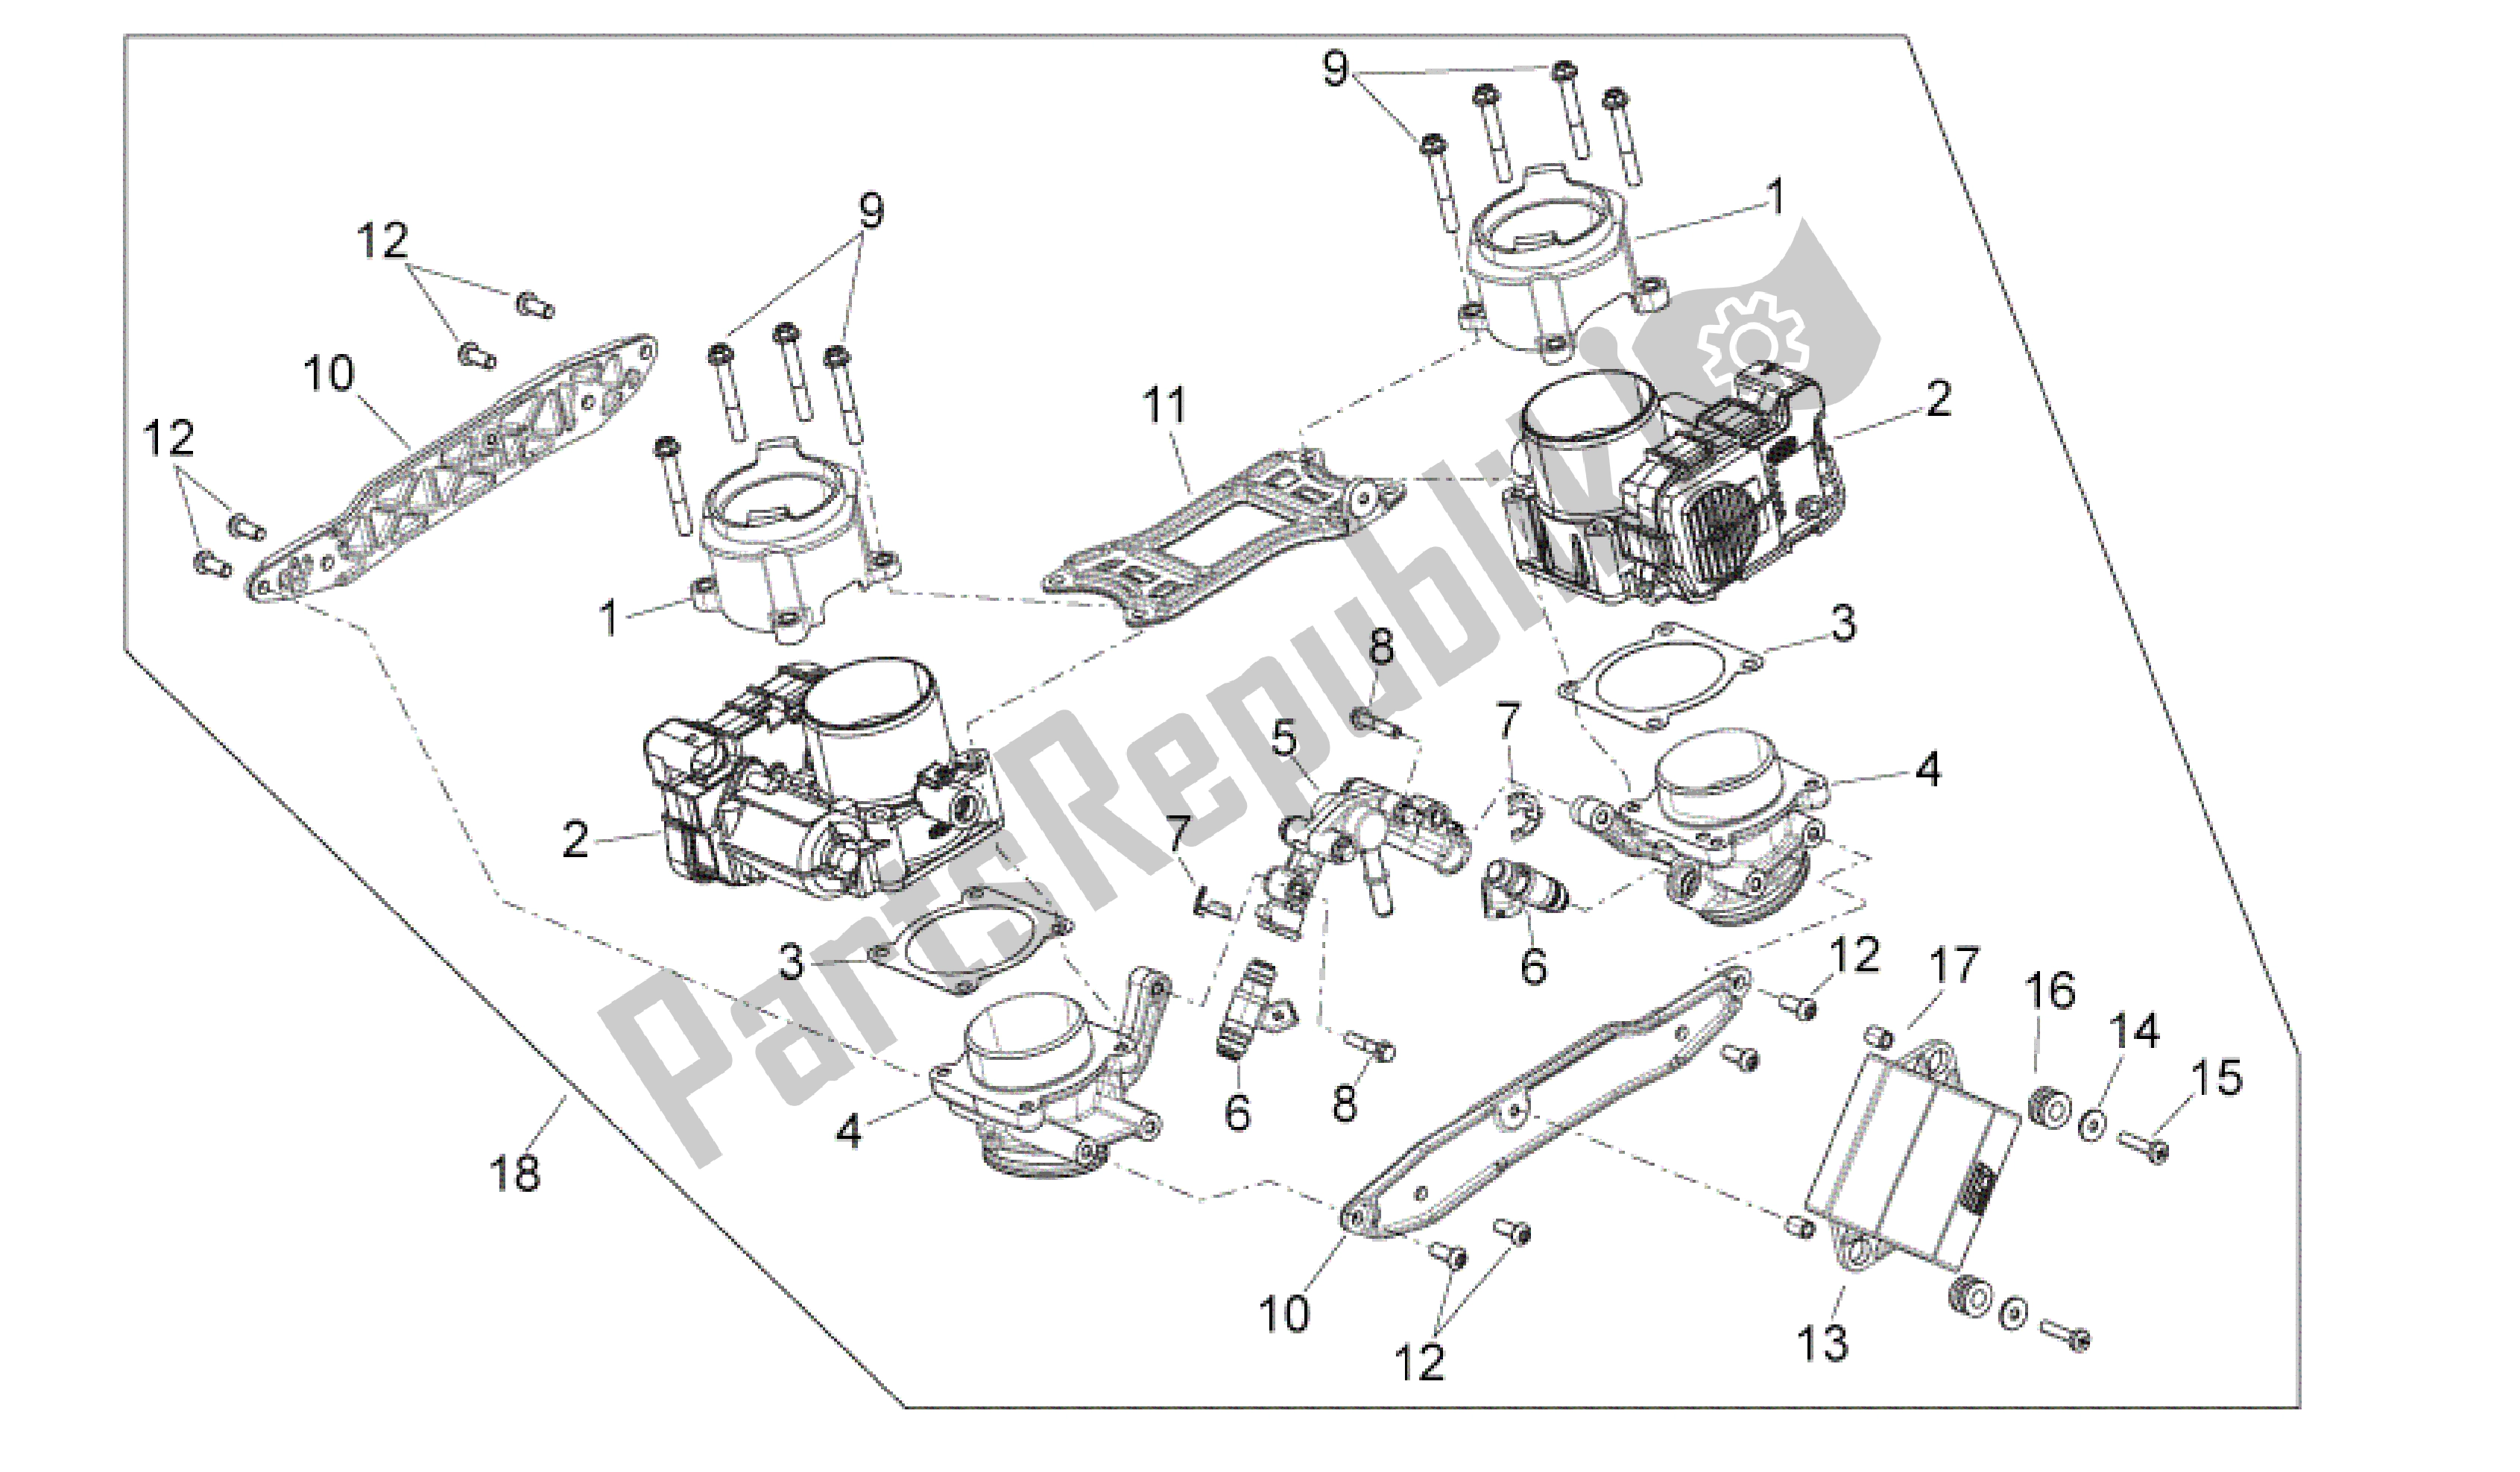 All parts for the Throttle Body of the Aprilia Shiver 750 2007 - 2009